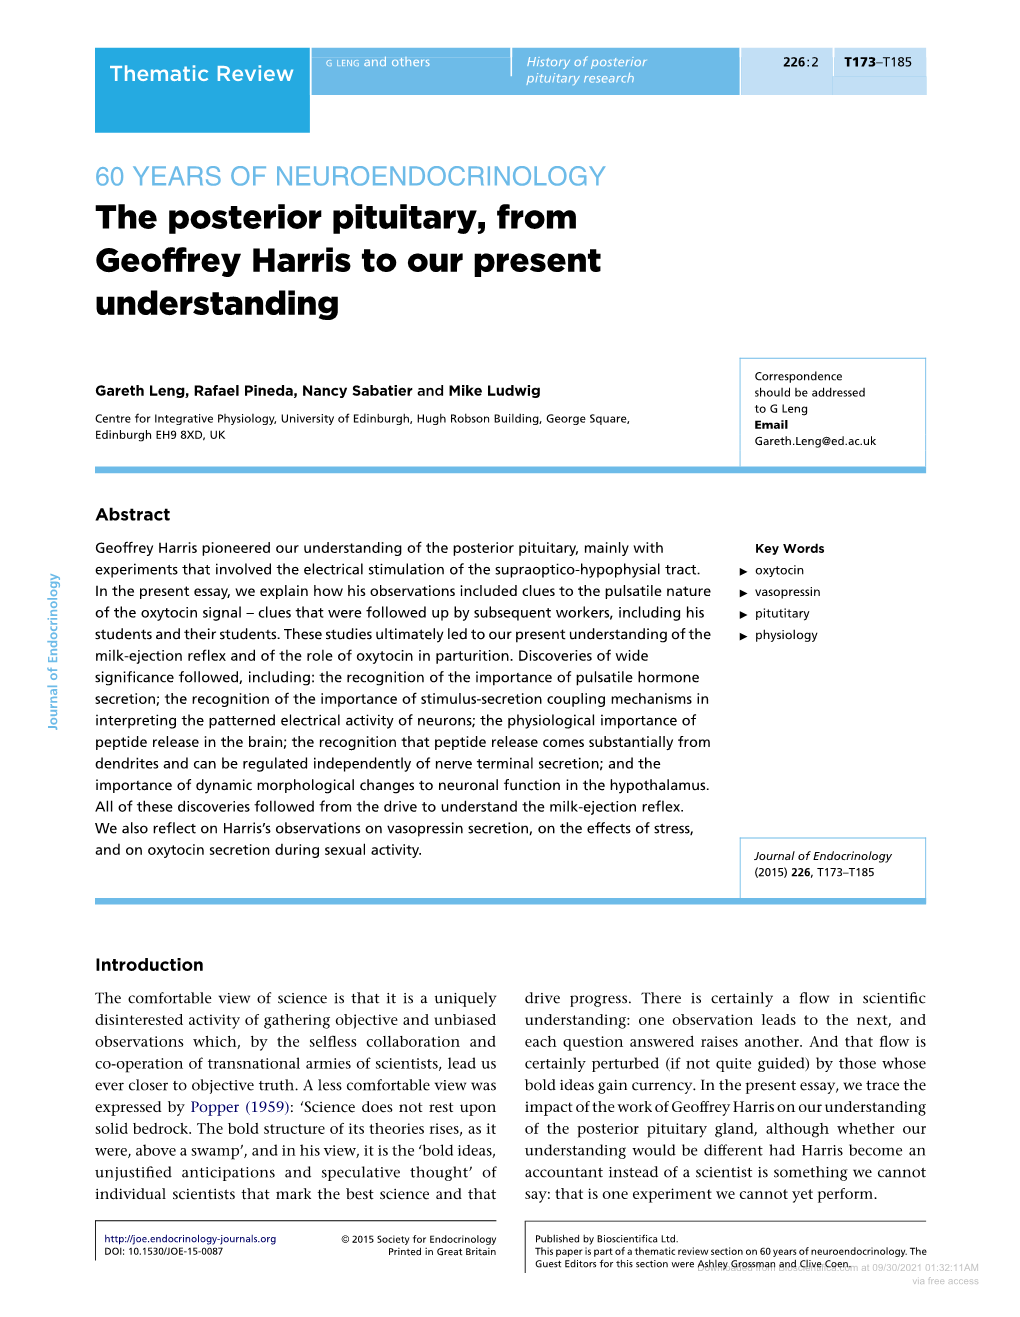 The Posterior Pituitary, from Geoffrey Harris to Our Present Understanding